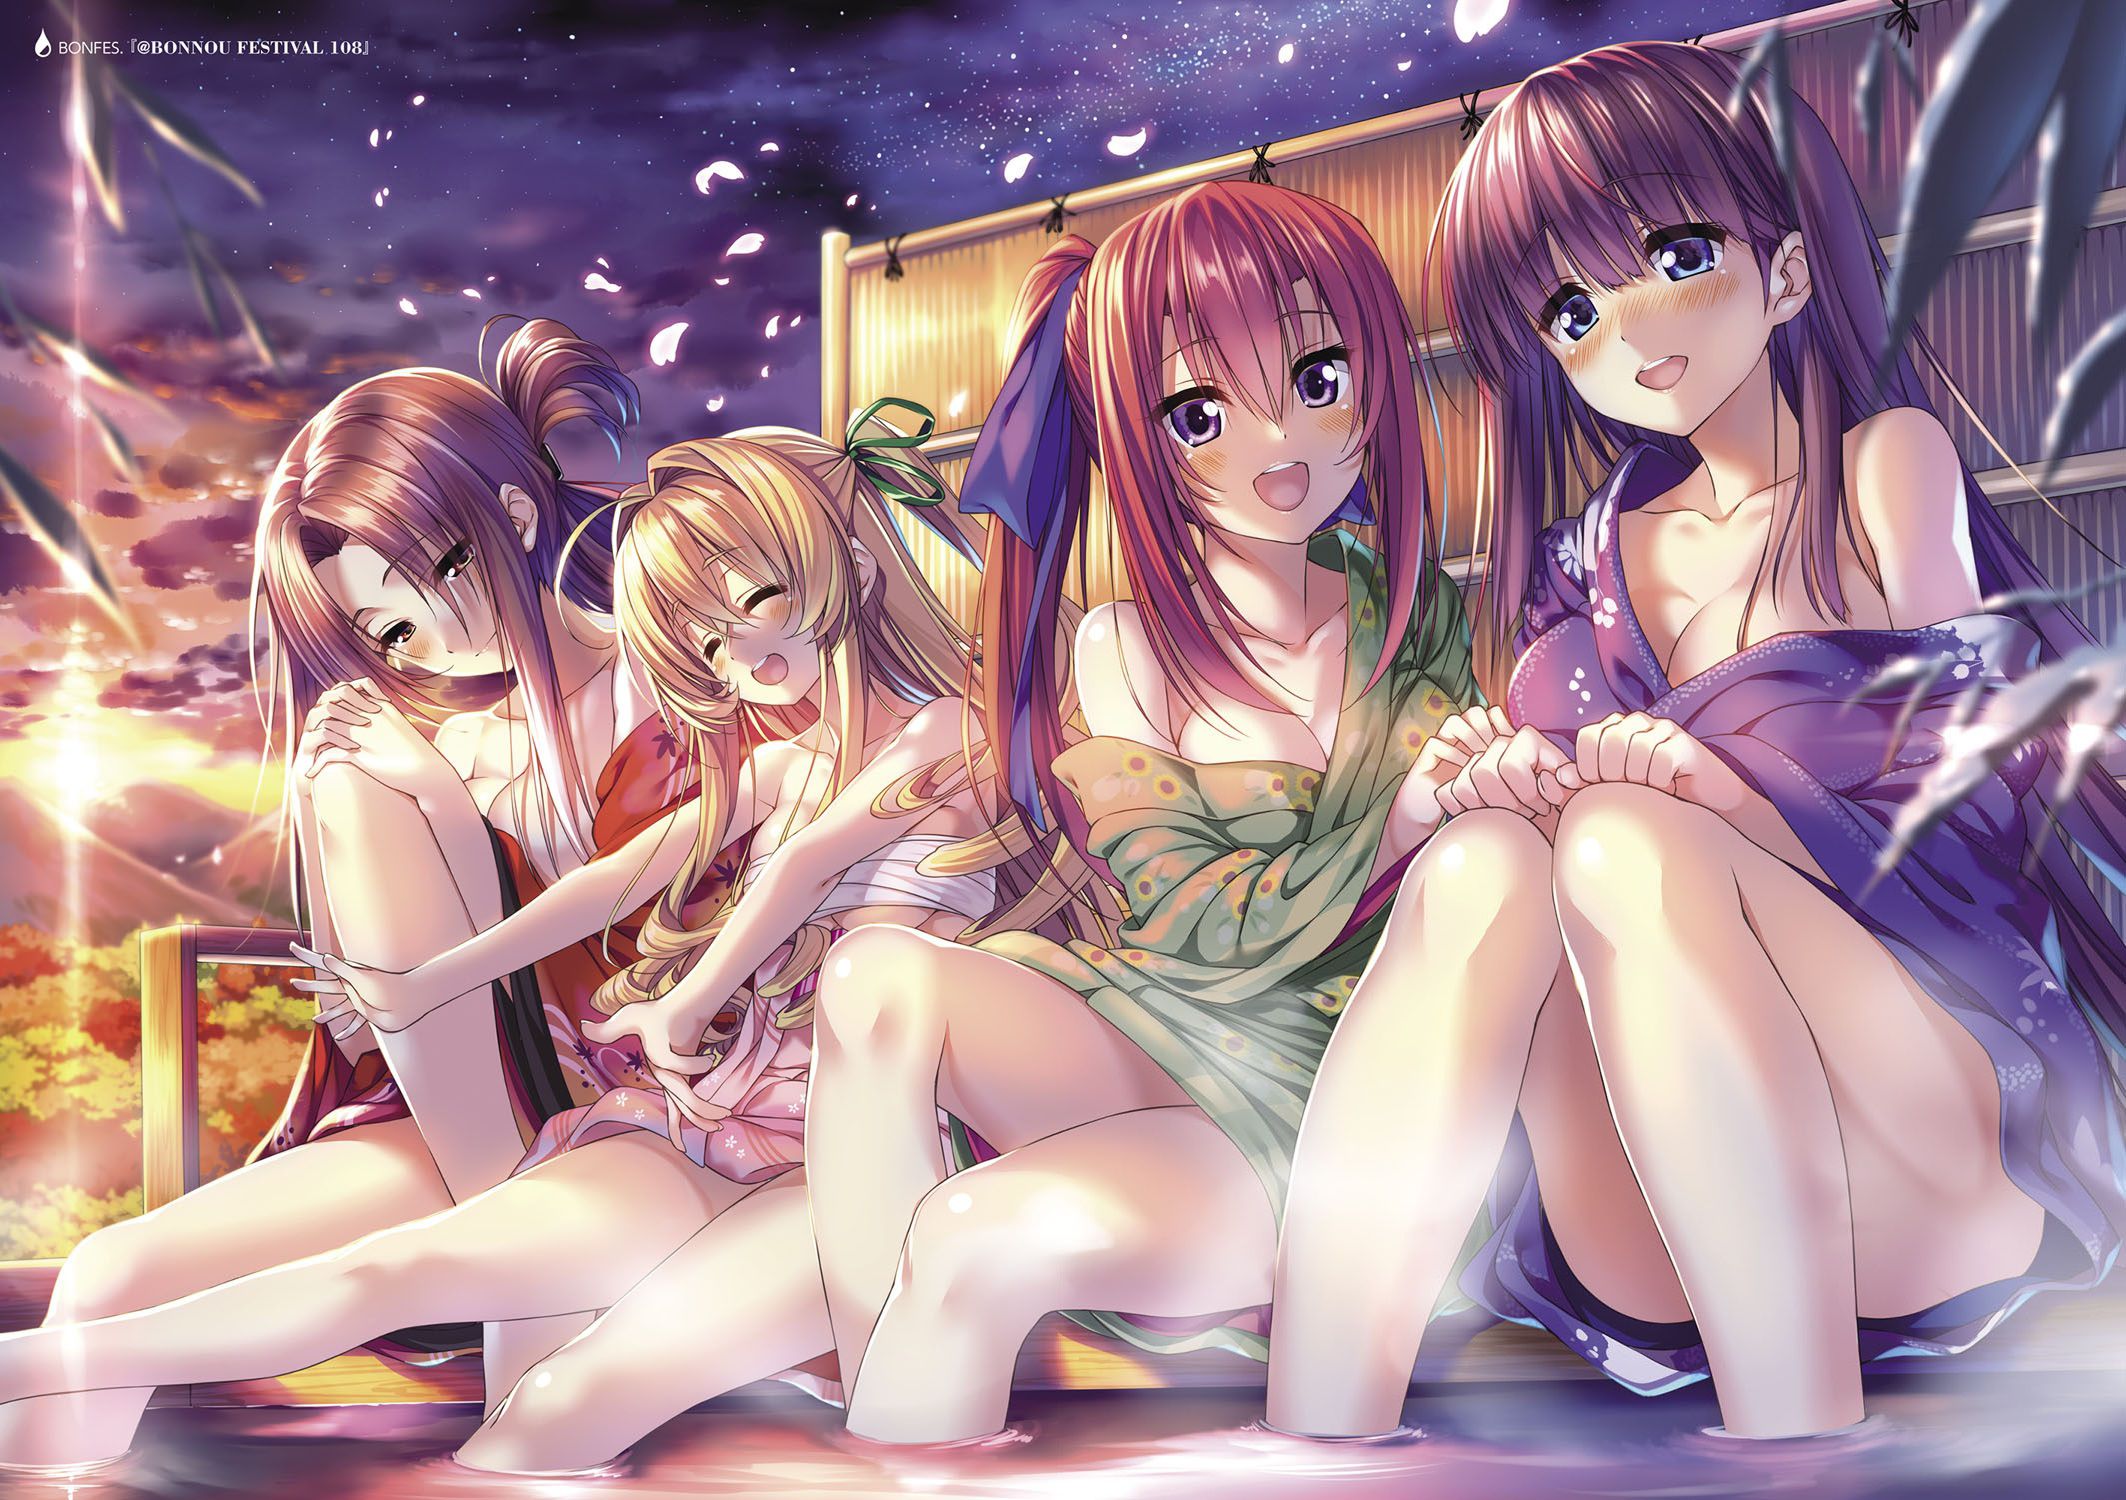 Erotic anime summary erotic image collection of beautiful girls and beautiful girls taking a bath [50 sheets] 15